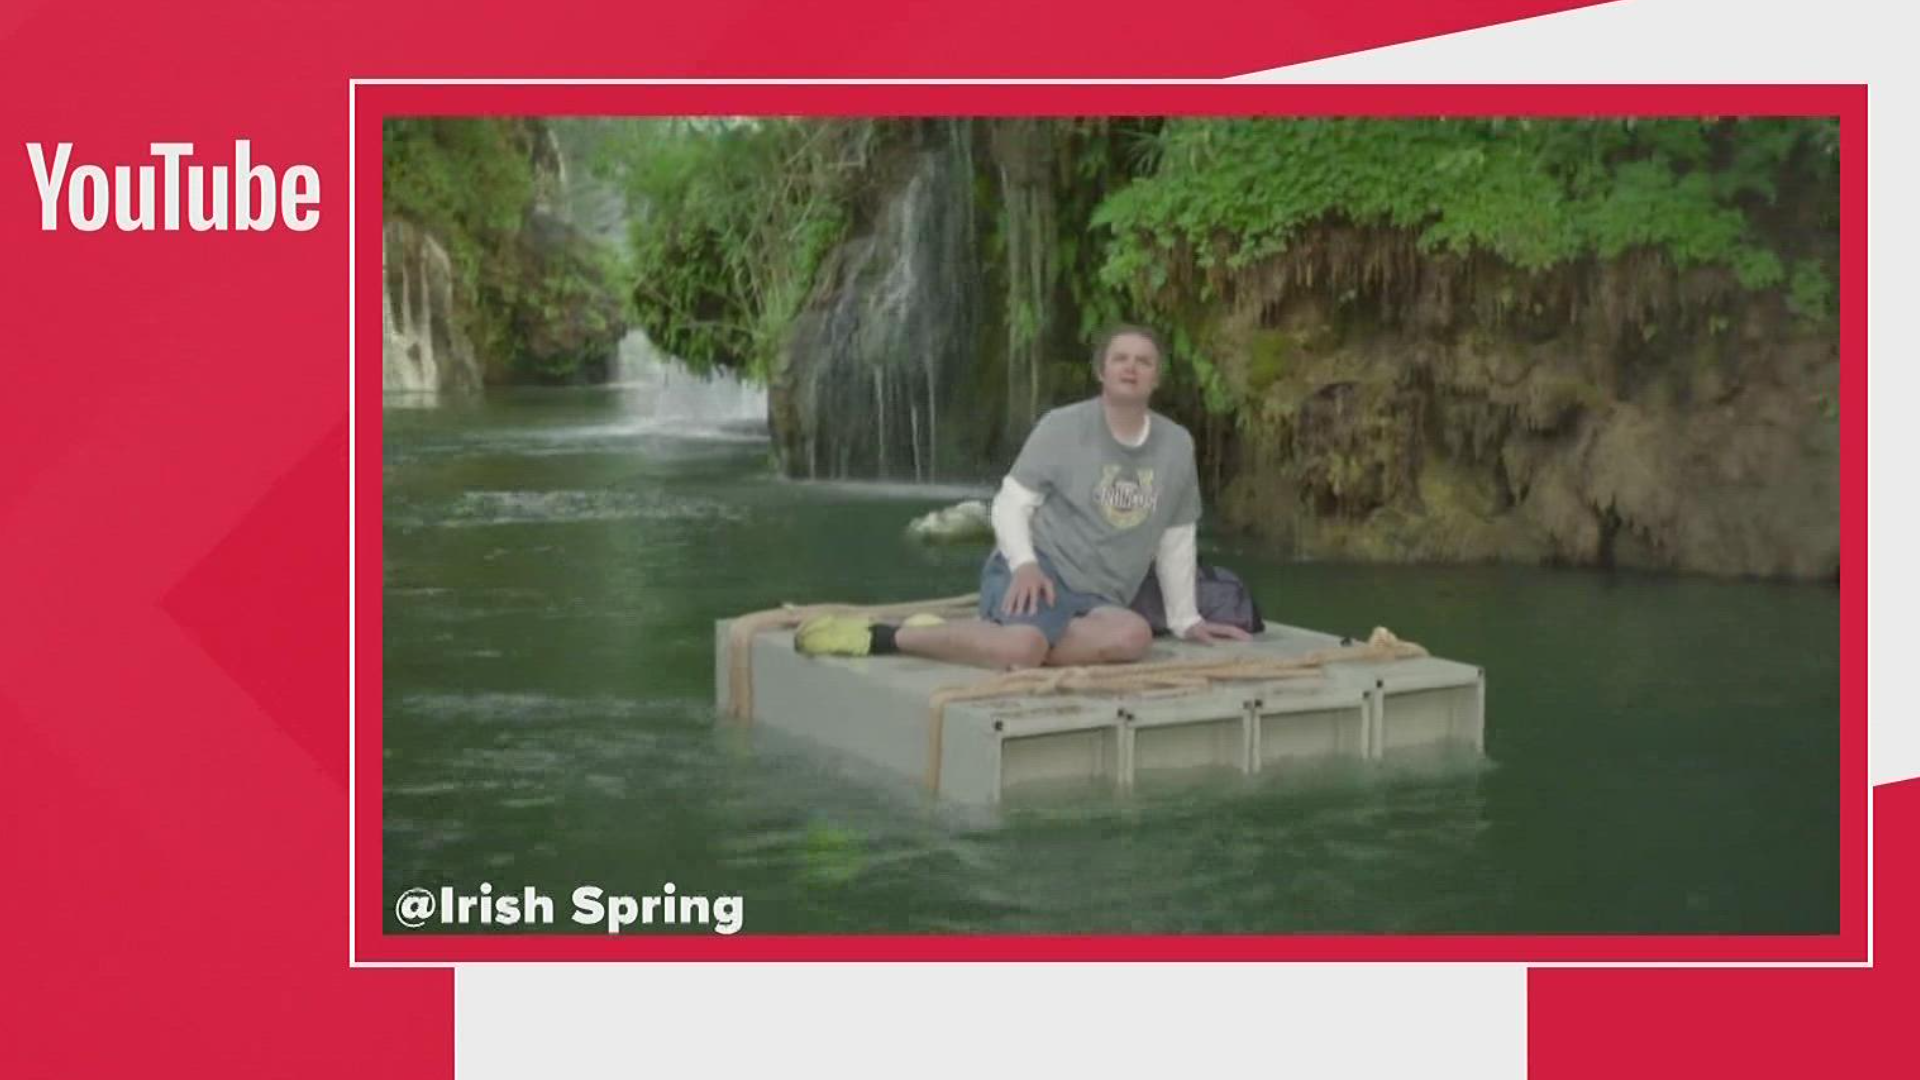 The Irish Spring commercial featured a man in the school t-shirt.